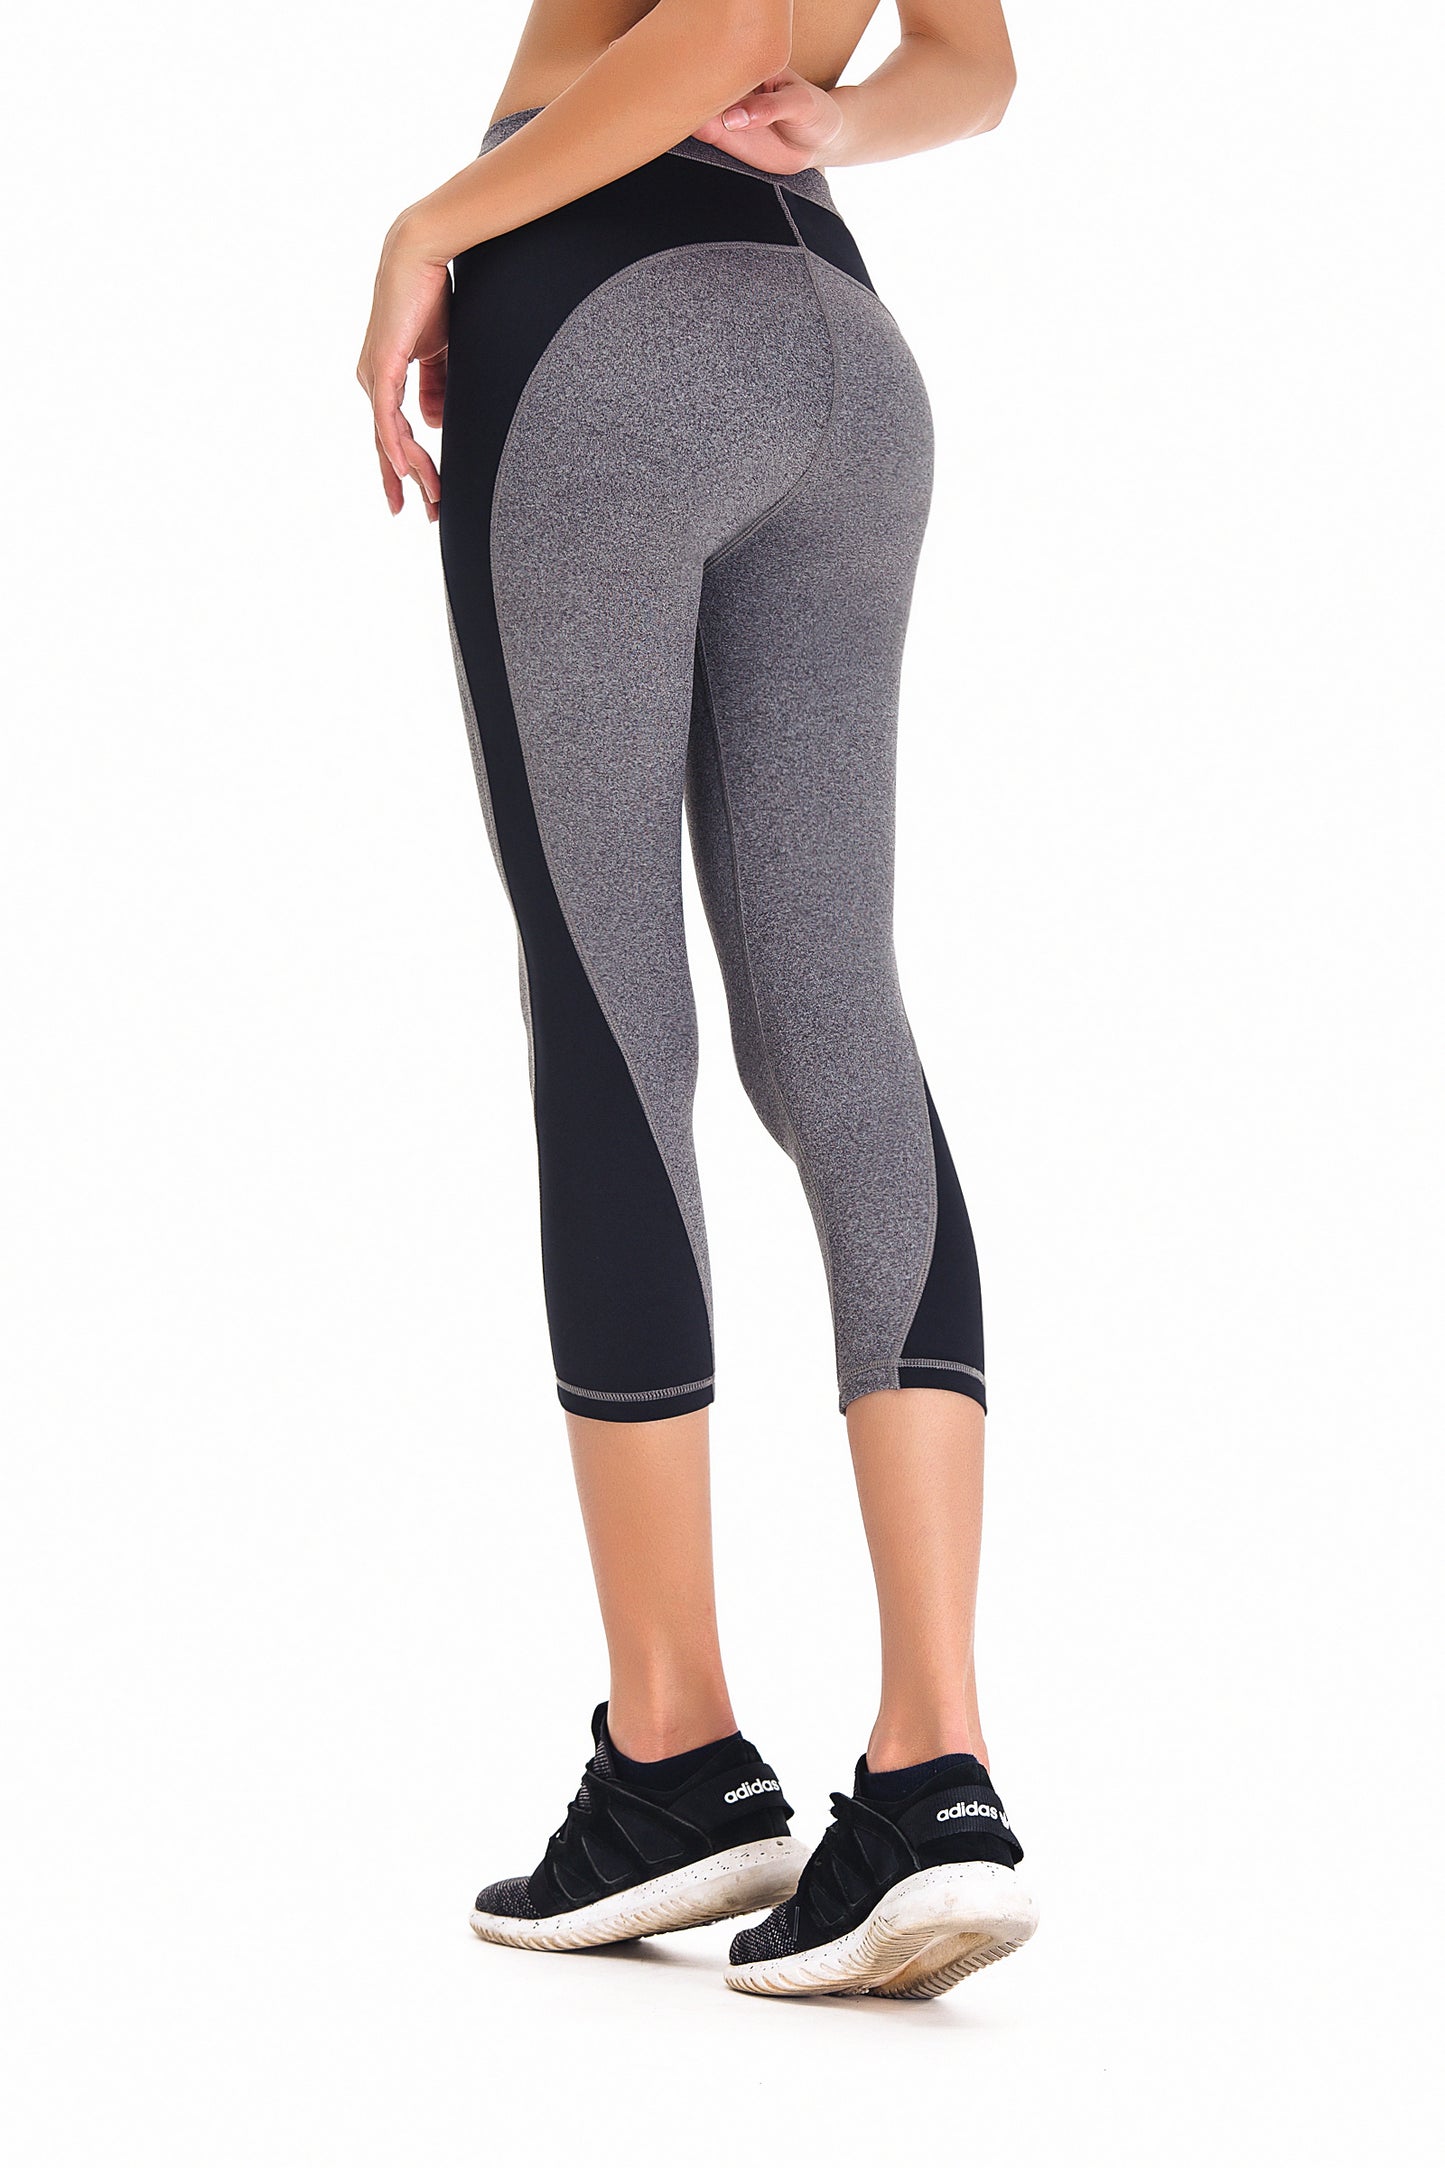 Sports Cropped Yoga Pants for women - 2 Tone Slim Workout Fitness Wear